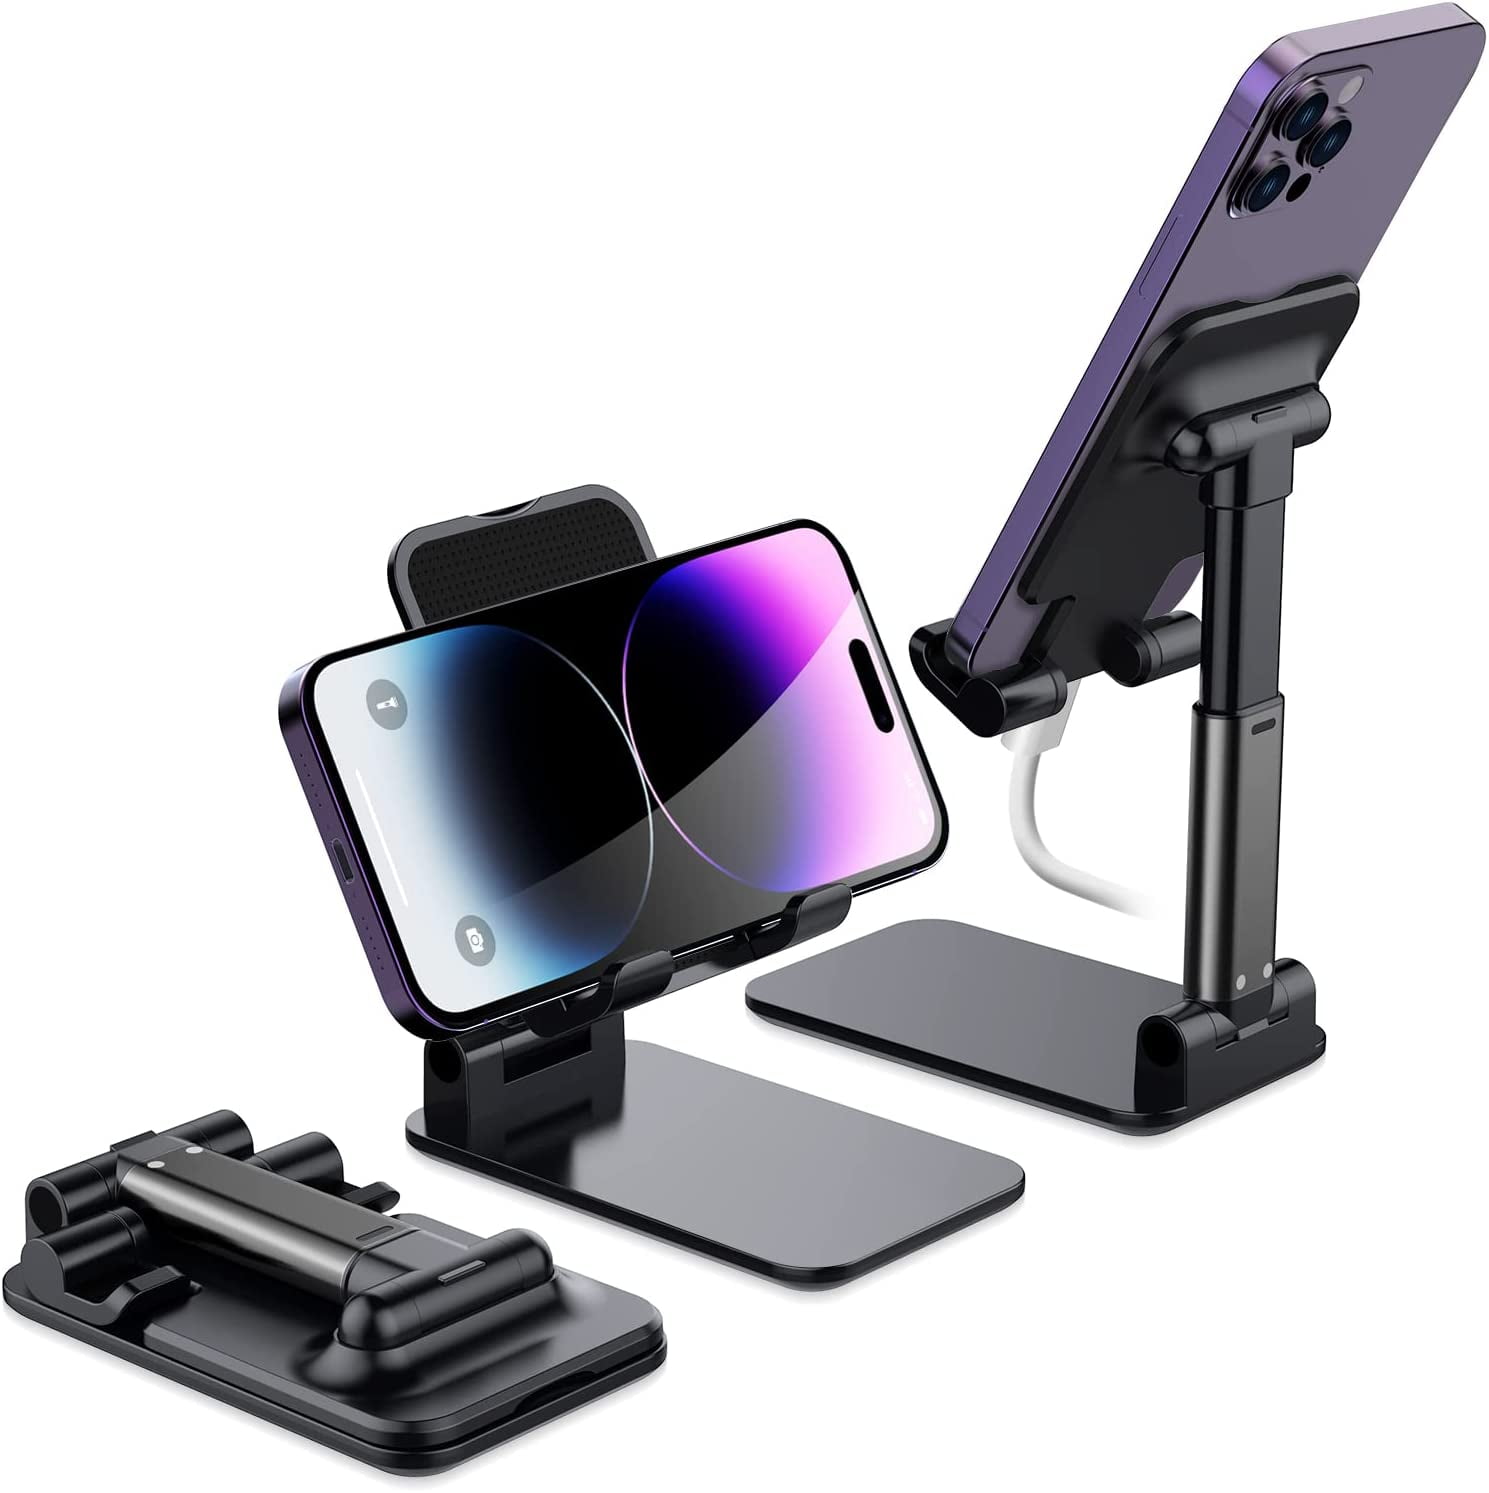 Adjustable Cell Phone Stand, TSV Phone Stand for Desk, Heavy Duty Phone  Holder Cradle, Multi-Purpose Desktop Phone Stand Fit for iPhone, All